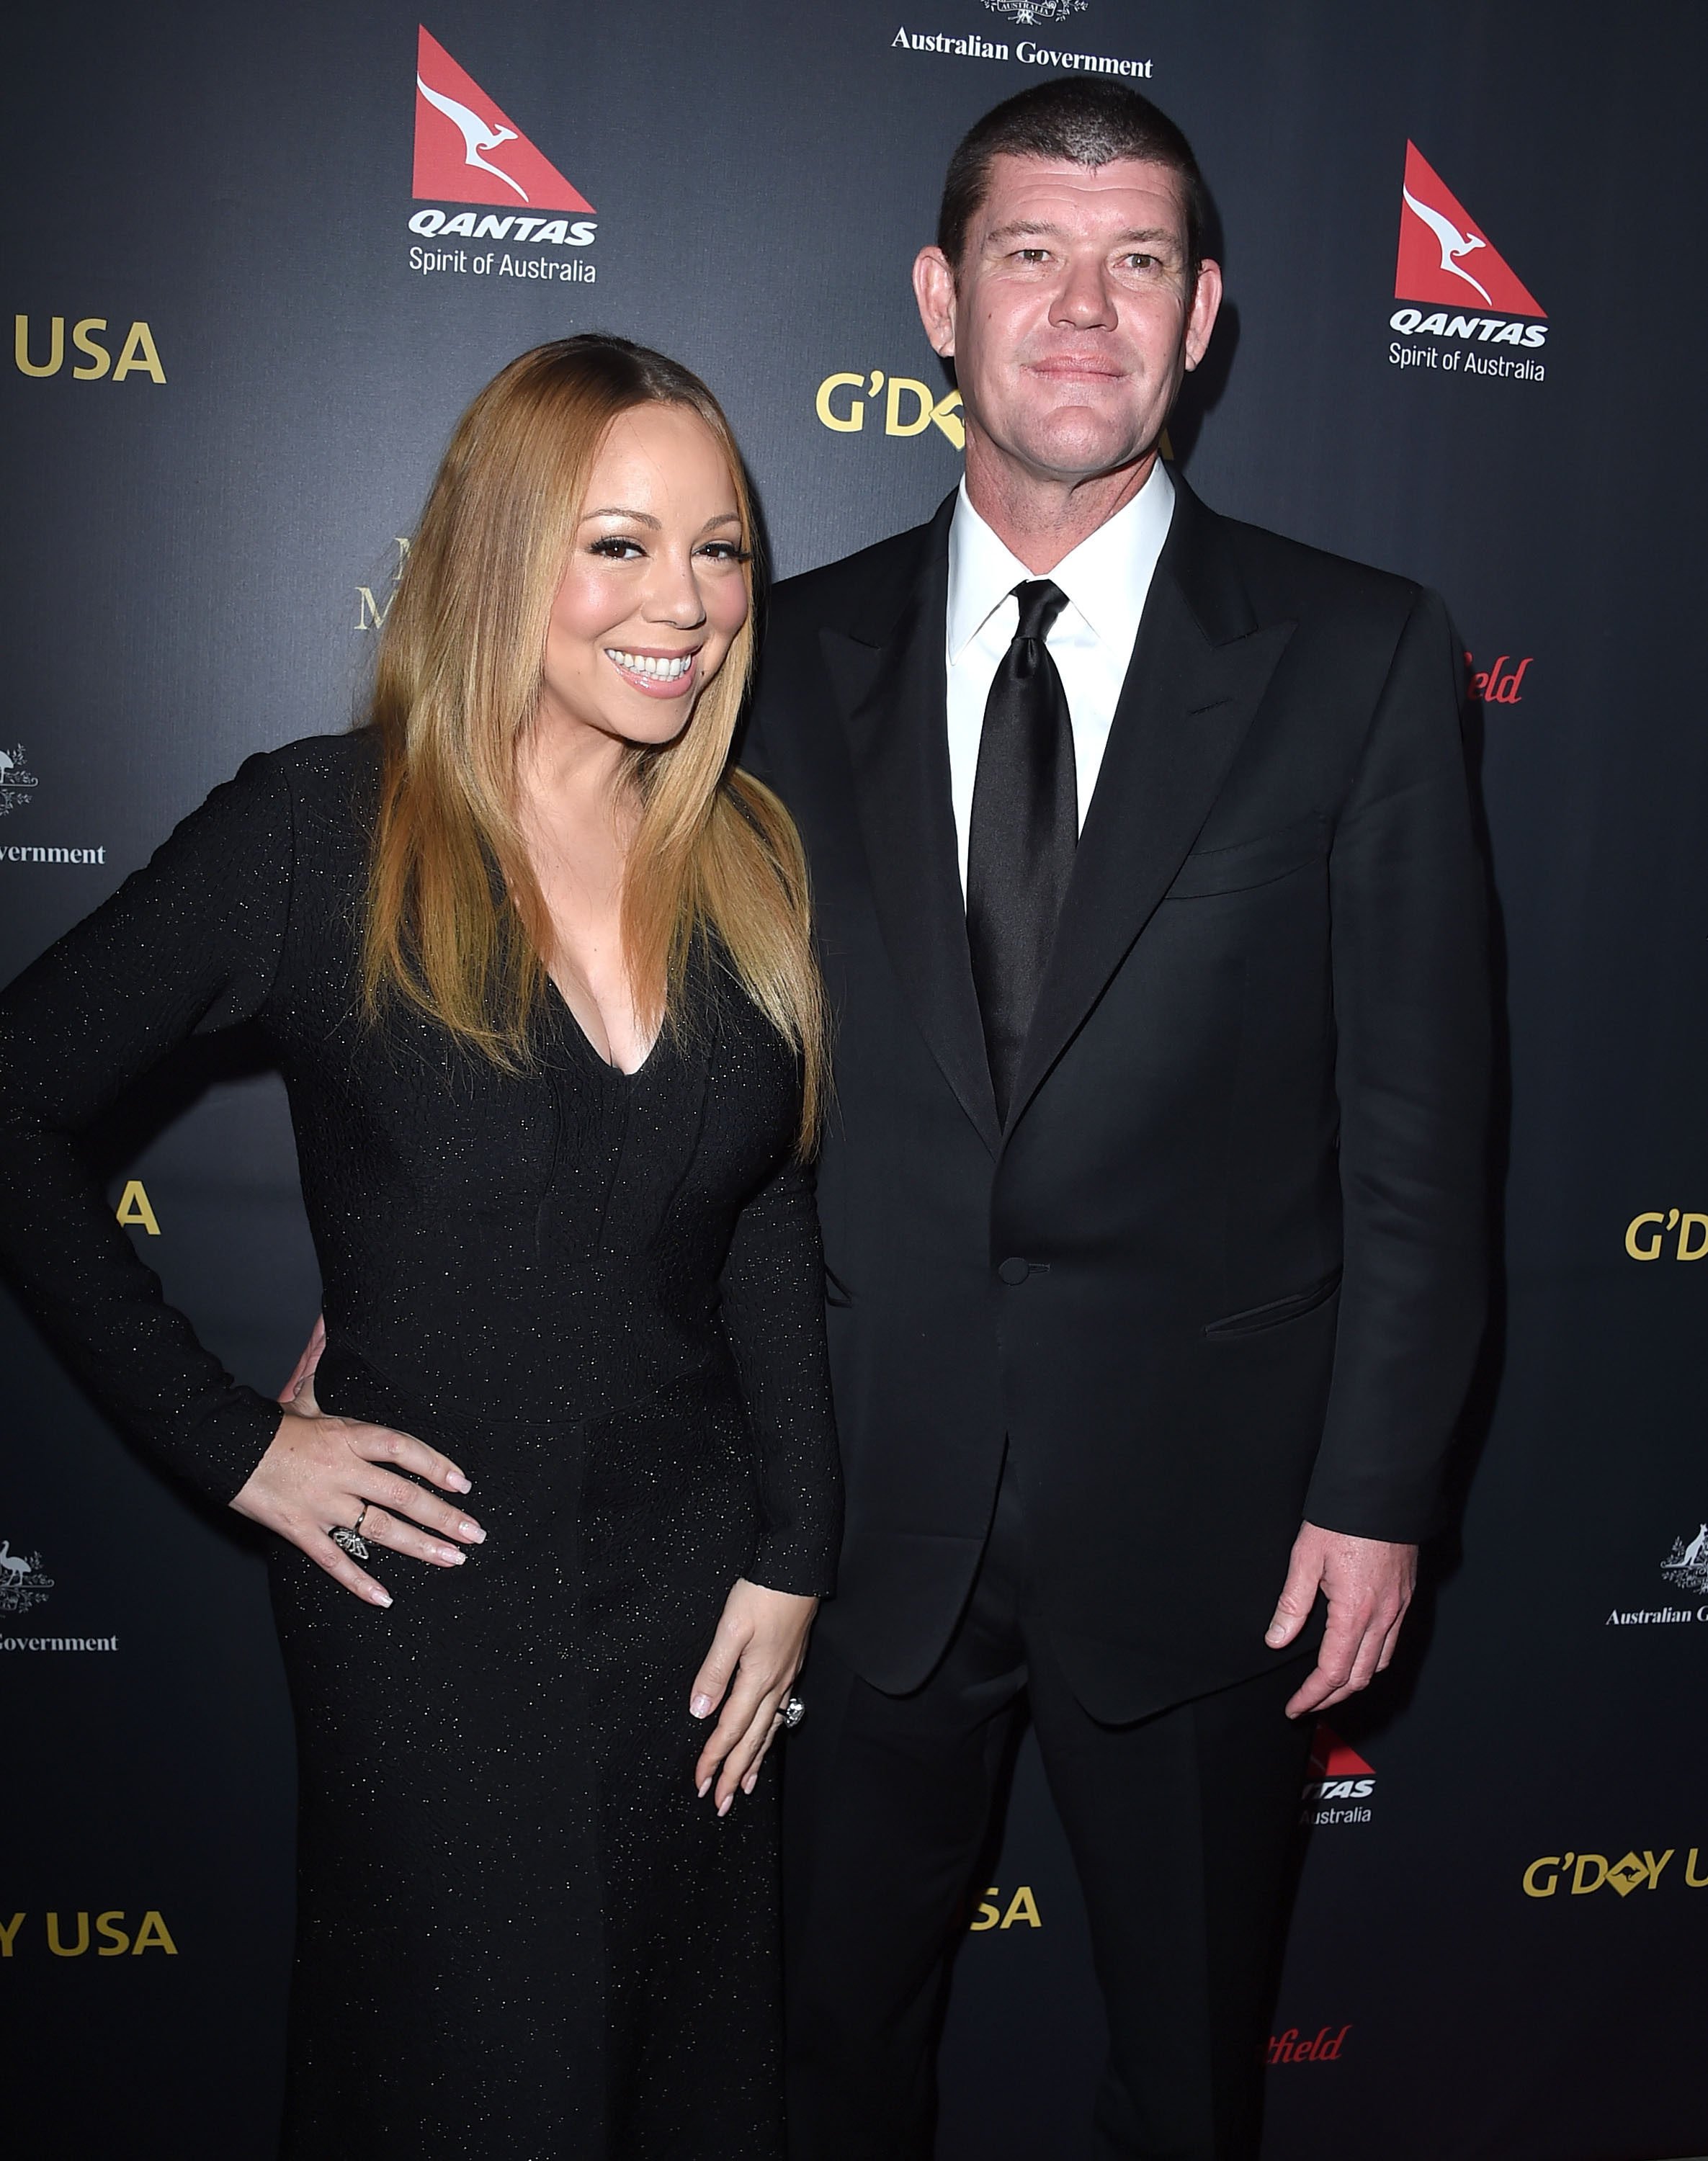 Mariah Carey’s gambling tycoon ex James Packer has seen his fair share of ups and downs, but he’s still a billionaire. Photo: Getty Images